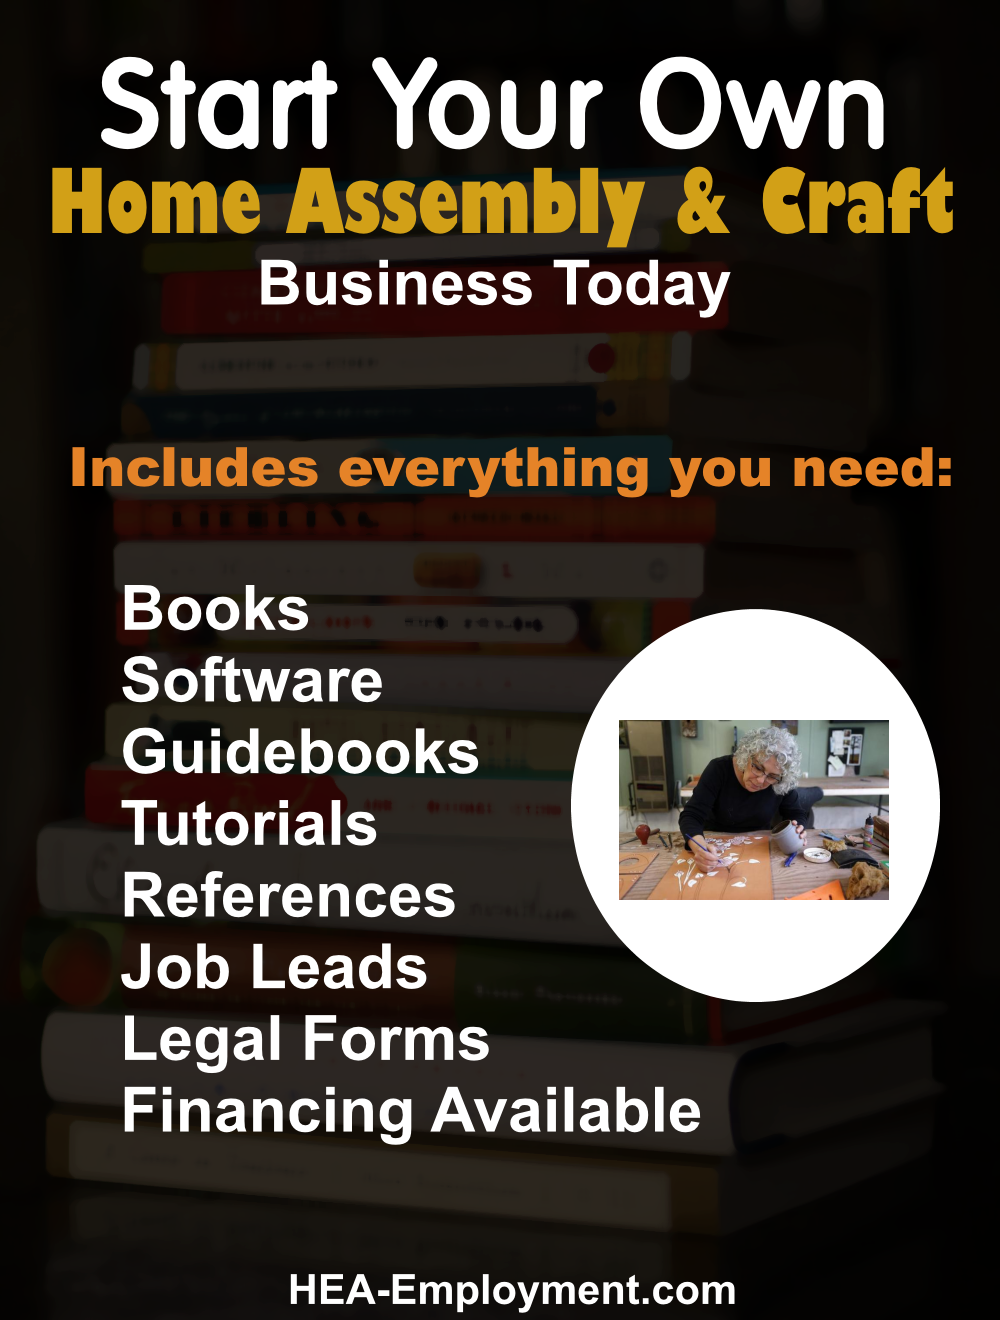 Start your own assembly and craft legitimate home based business. Fully equipped home business package with everything you need to get started. Productivity software, tutorials, guidebooks, references, manuals, tax advice and legal forms are included with each kit. Be your own boss!